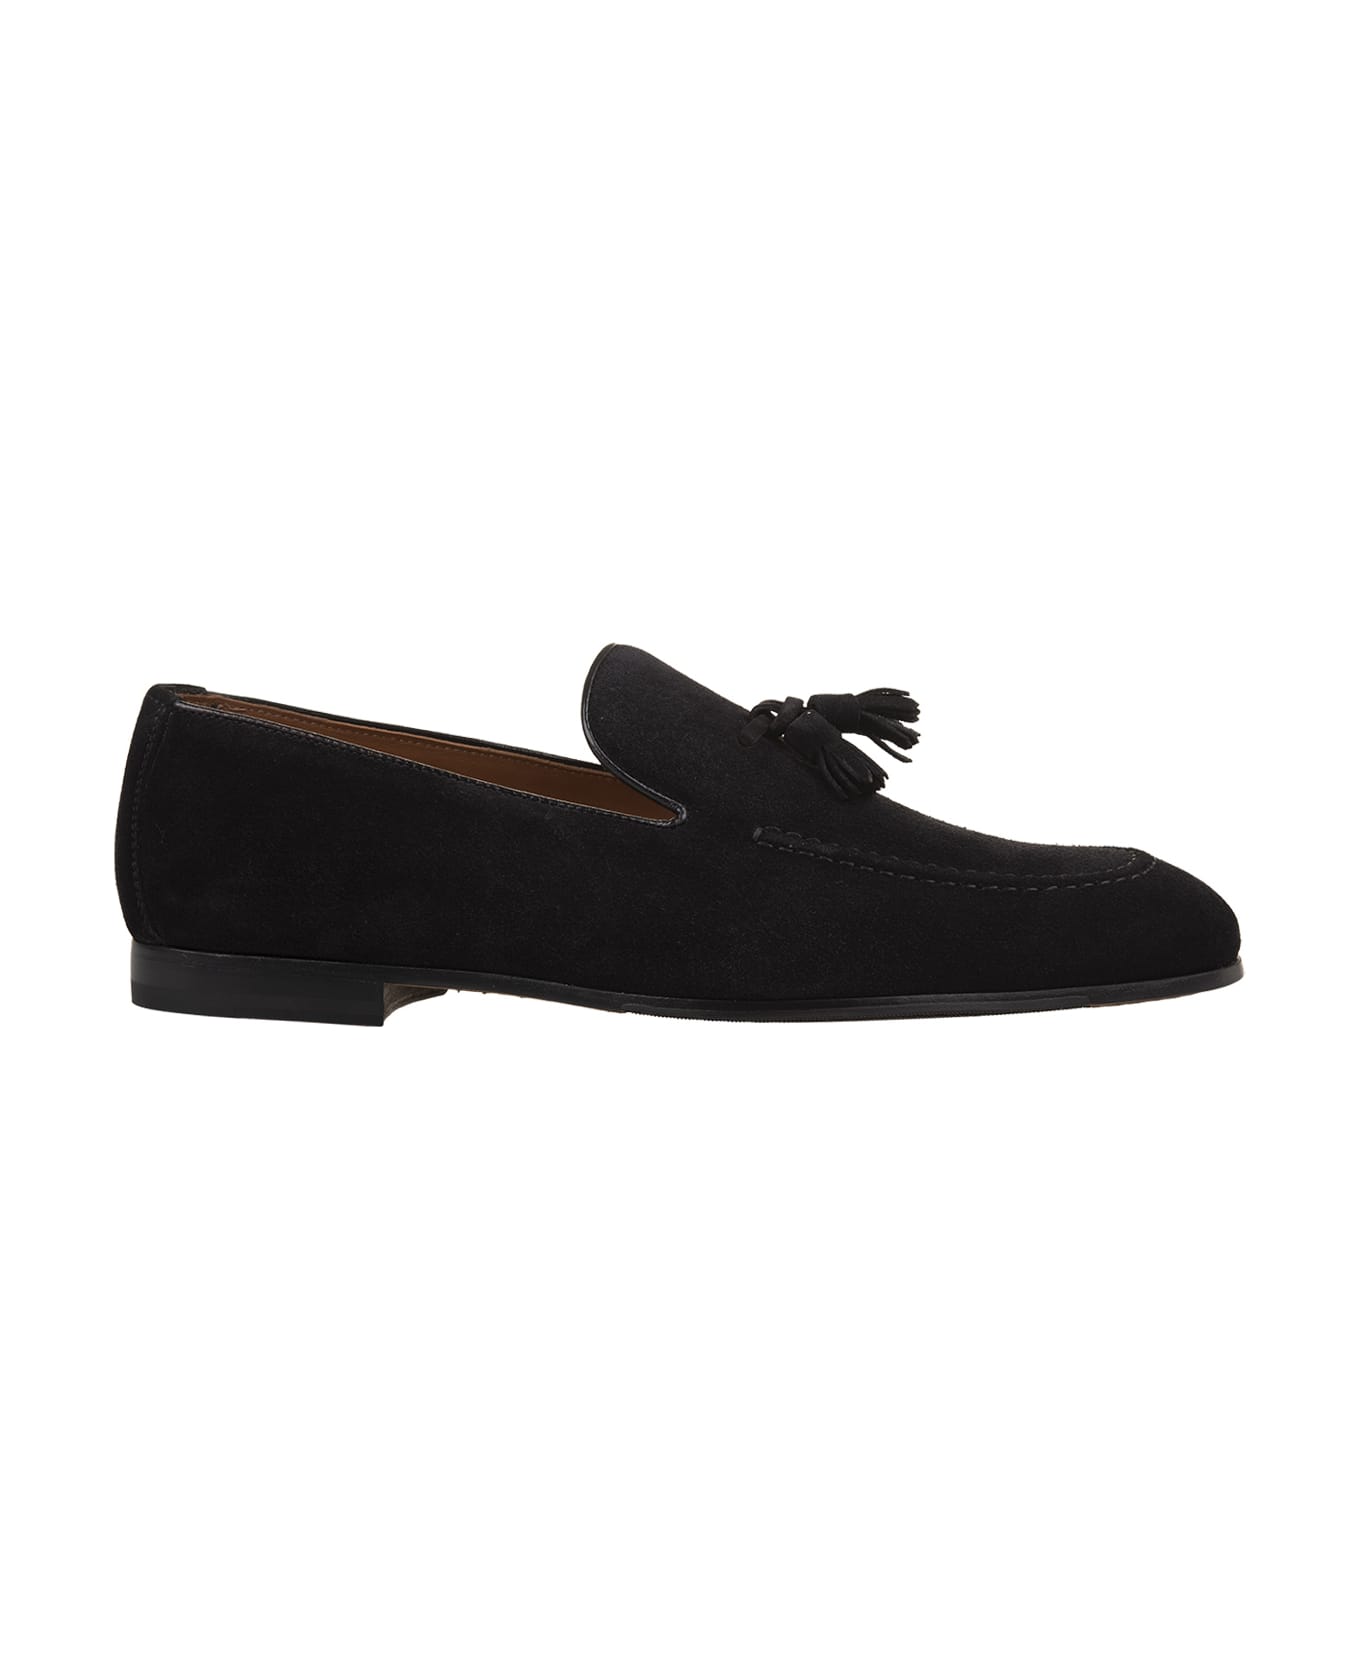 Doucal's Black Suede Loafers With Tassels - Black